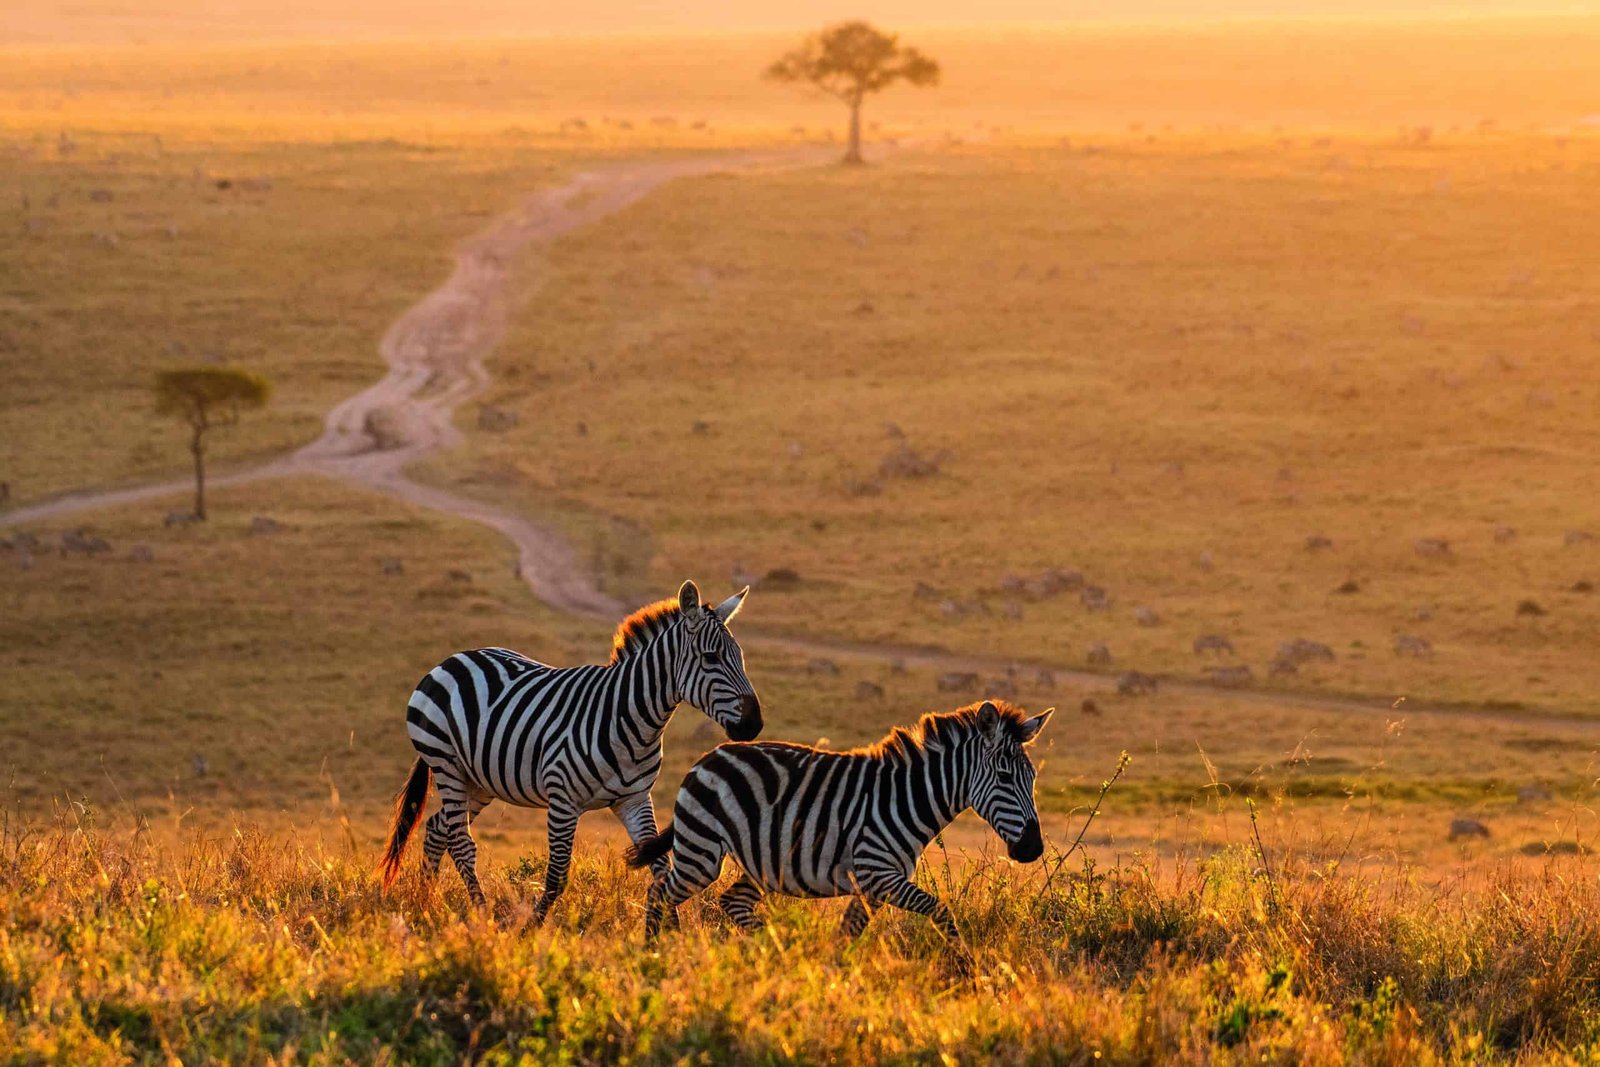 Two zebras travel through a grassy field at sunset, embodying the soul of the wild.